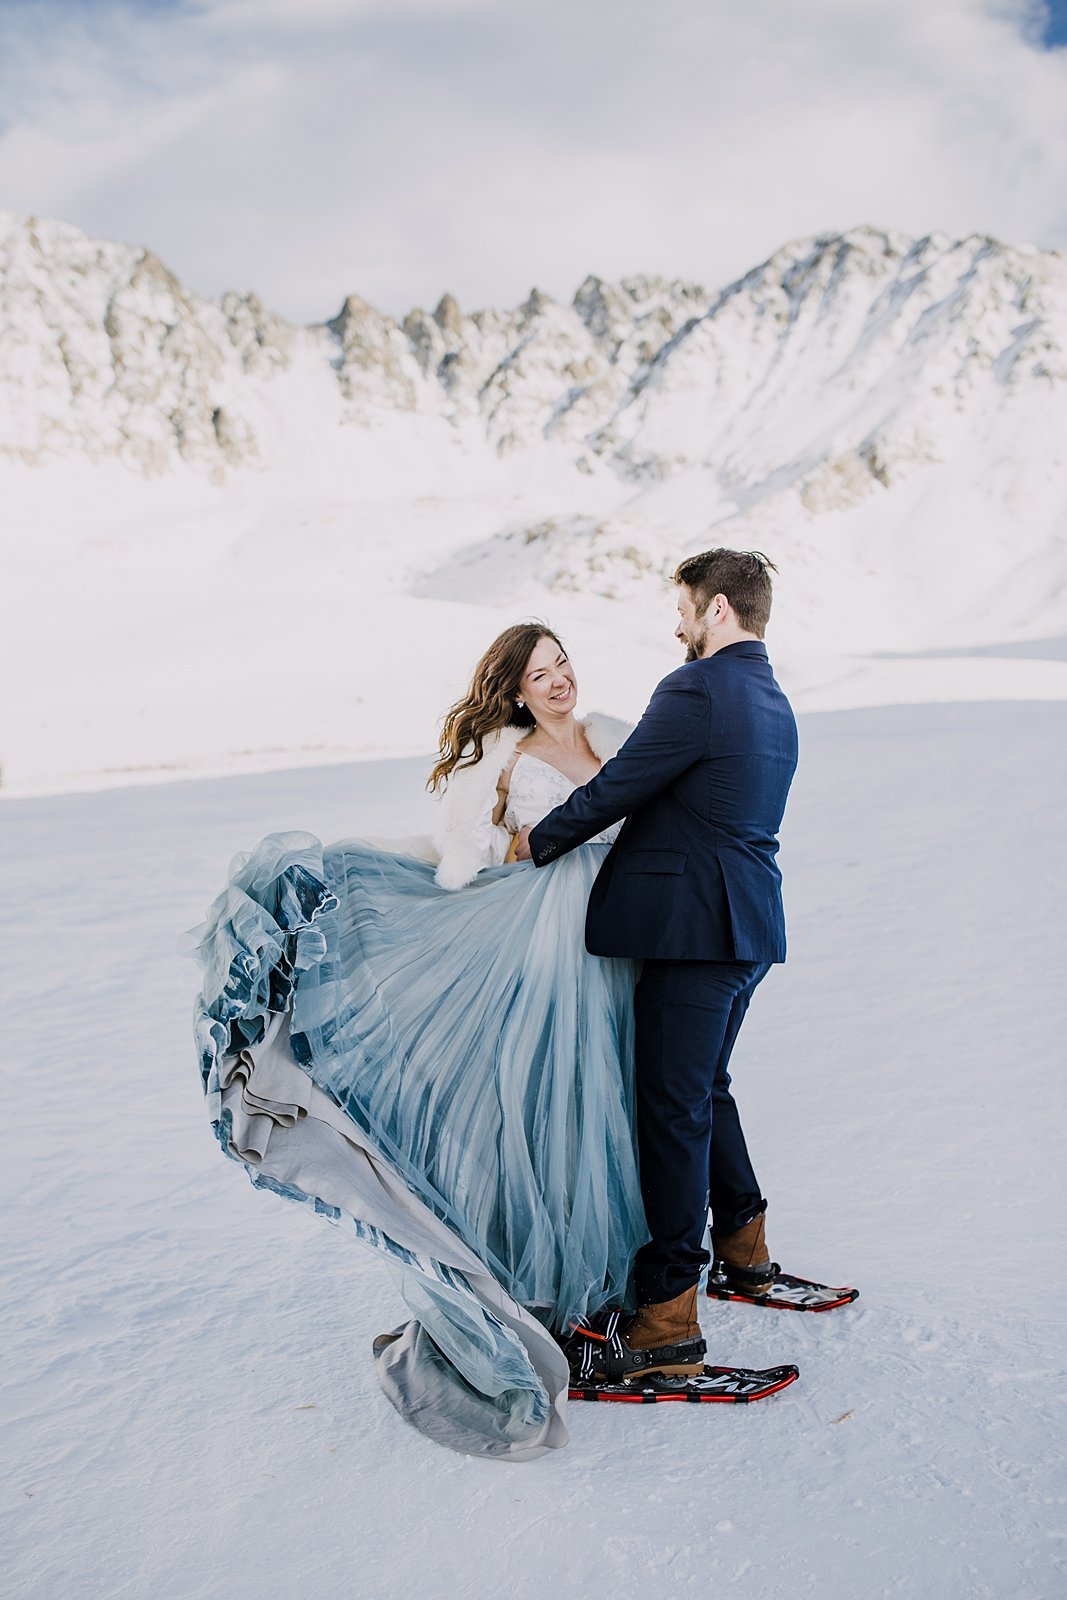 Bride and groom first dance in the snow, winter mountain elopement, yukon charlies womens snowshoes, colorado cabin wedding, bride swishing skirt, groom spinning bride